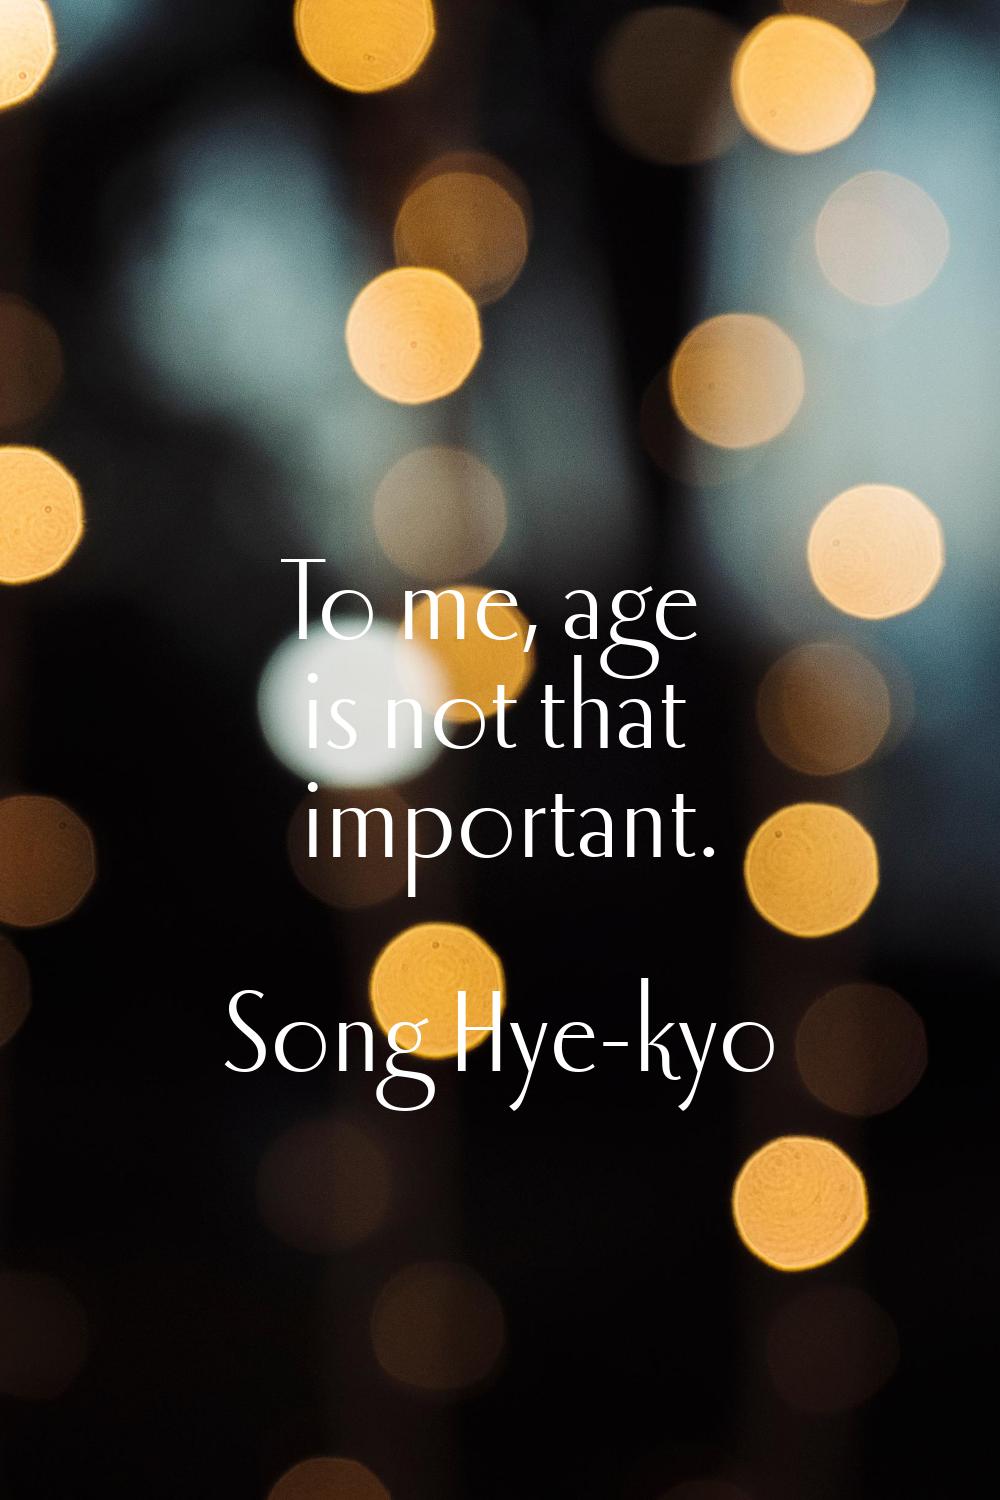 To me, age is not that important.